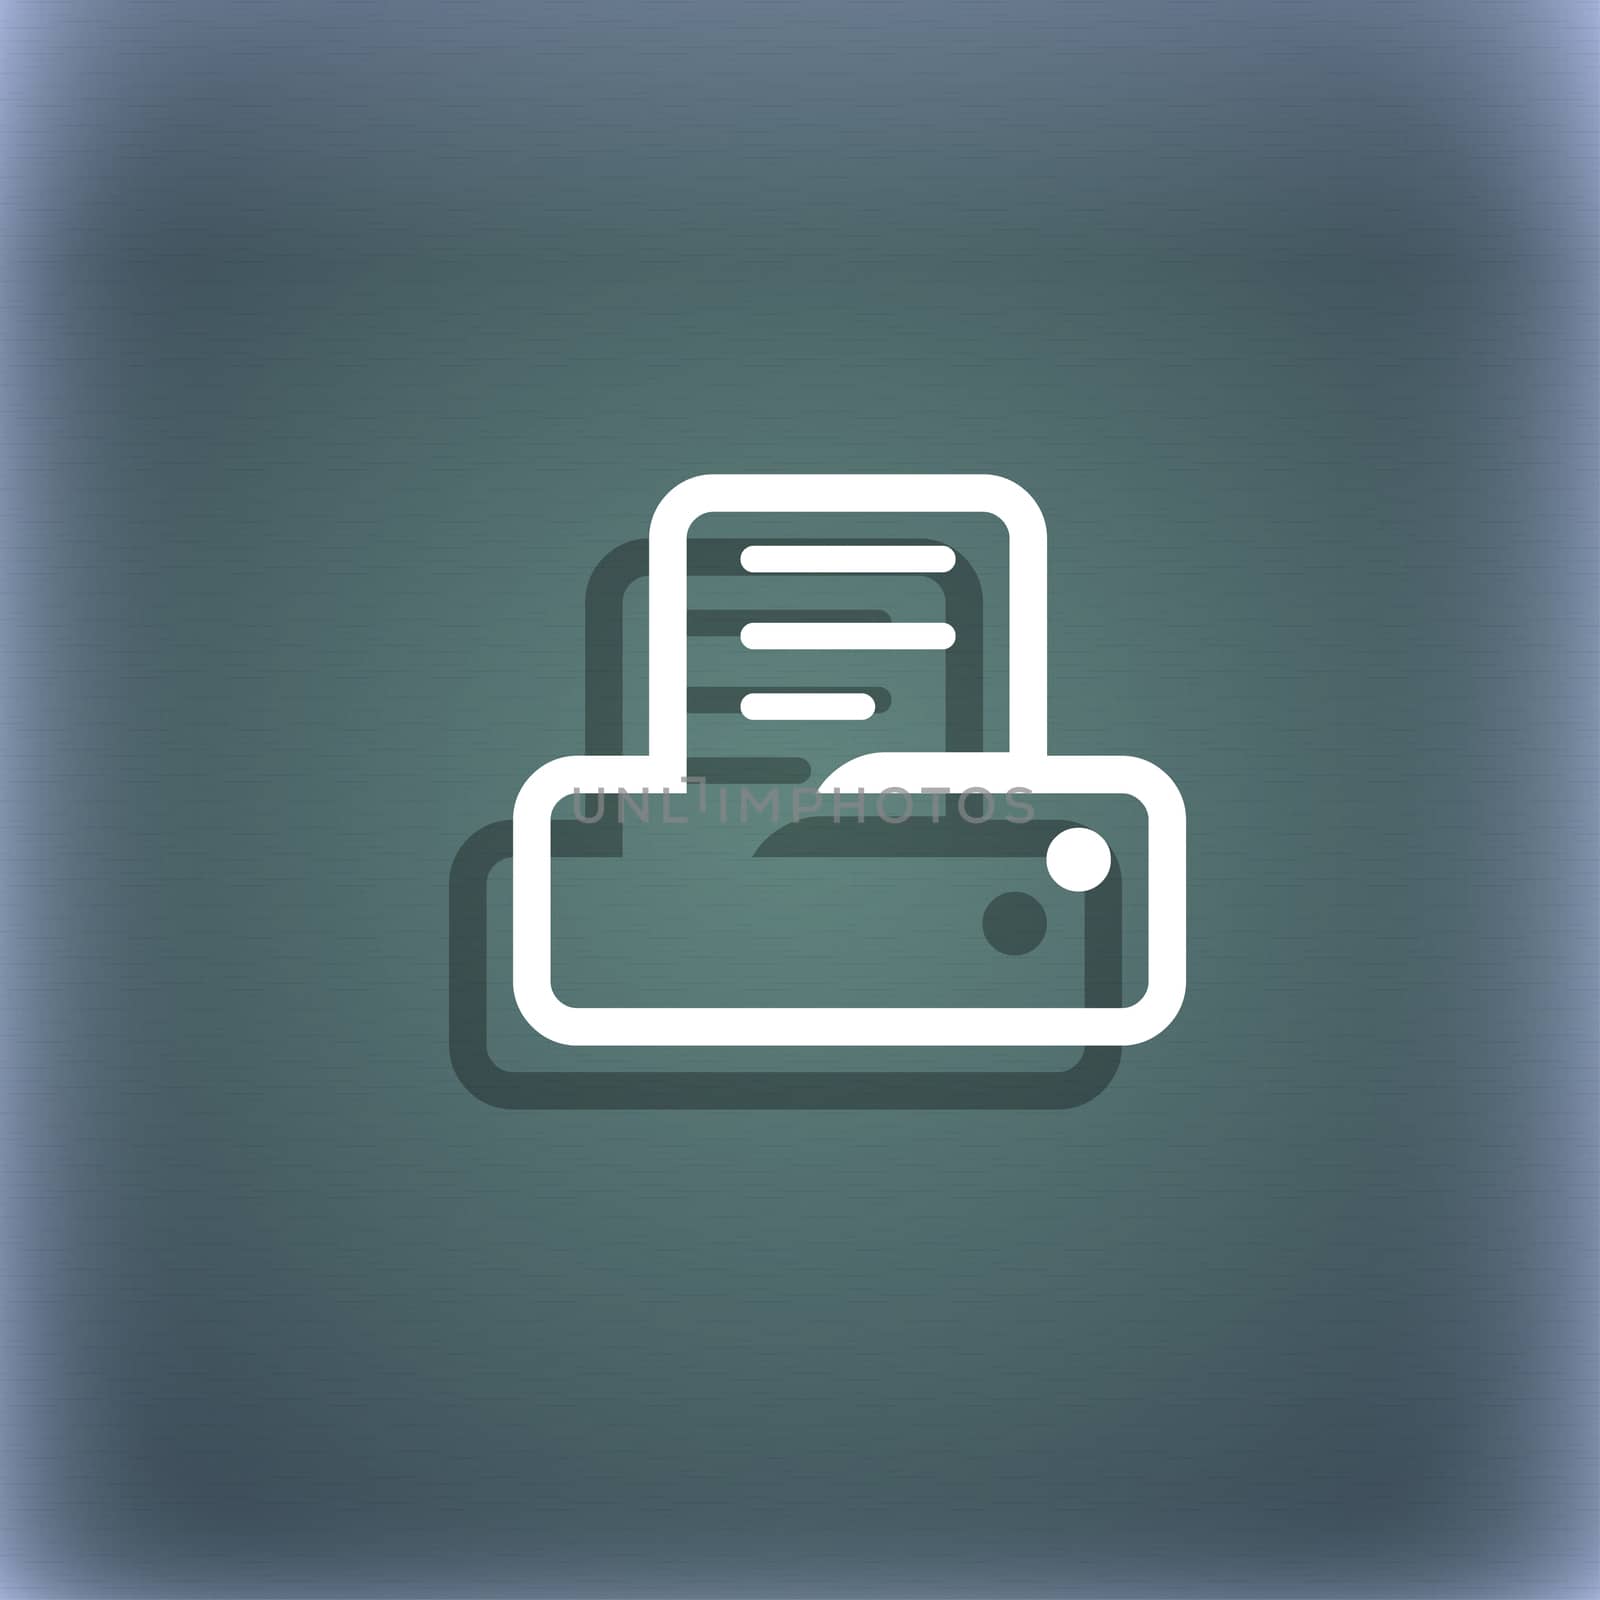 Printing icon symbol on the blue-green abstract background with shadow and space for your text. illustration